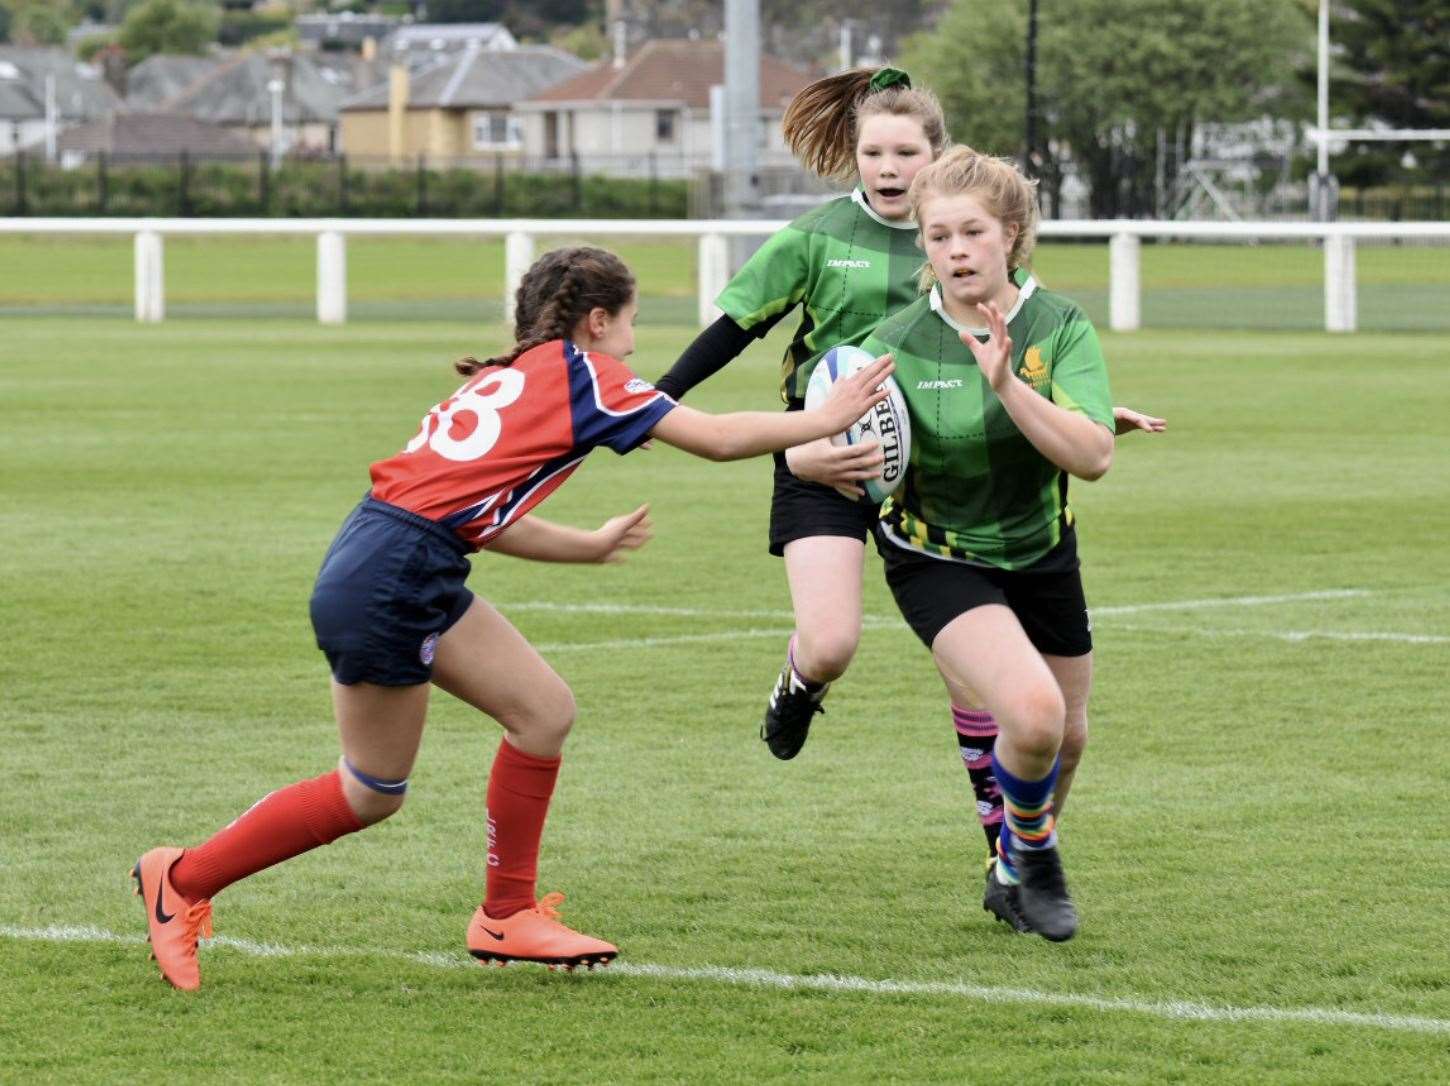 Scrum-half Hannah Dunnett has been named in the Scotland women's under-18 squad.